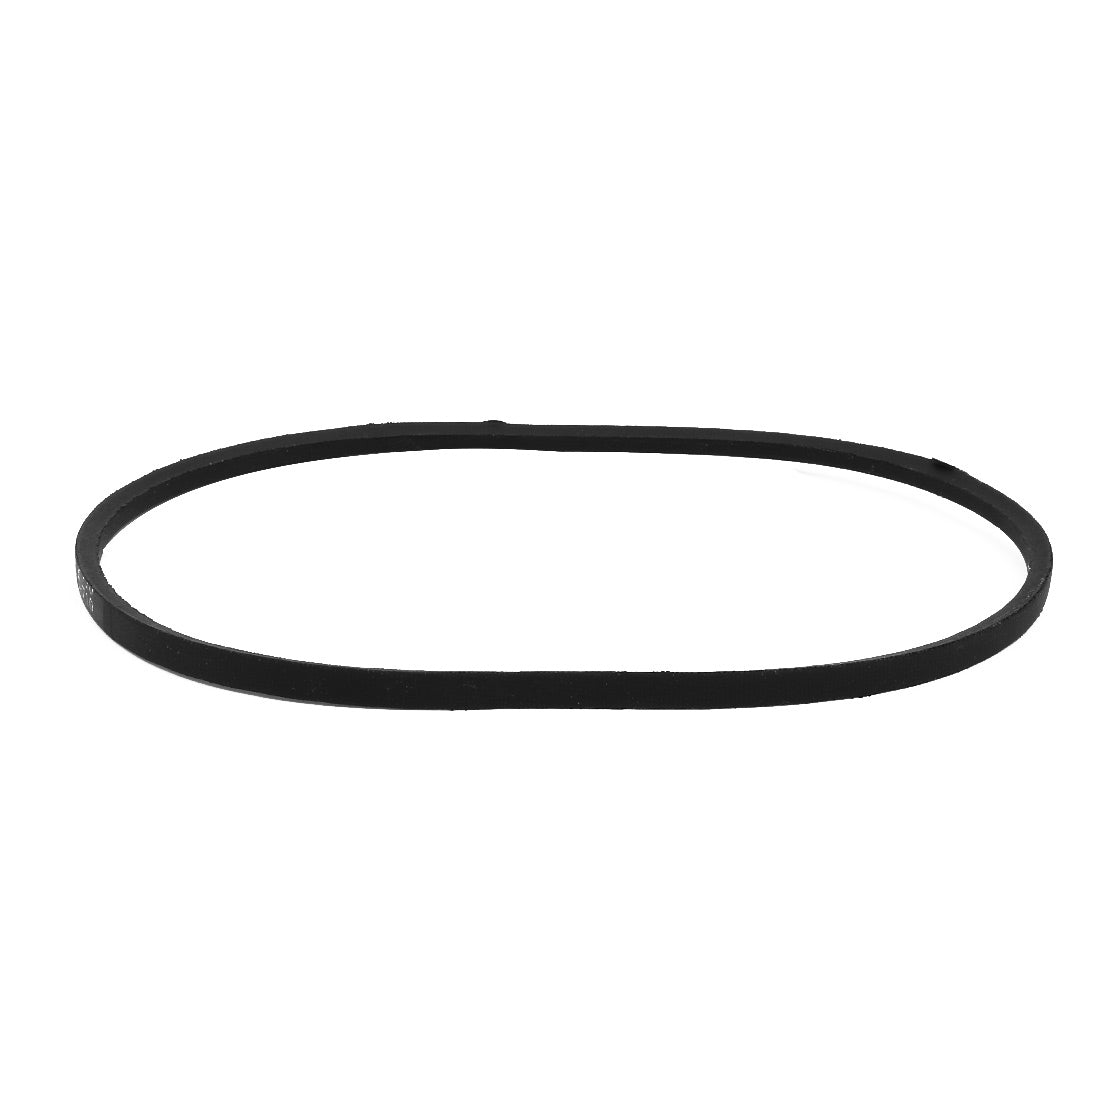 uxcell Uxcell O-710 Rubber Transmission Drive Belt V-Belt 10mm Wide 6mm Thick for Washing Machine